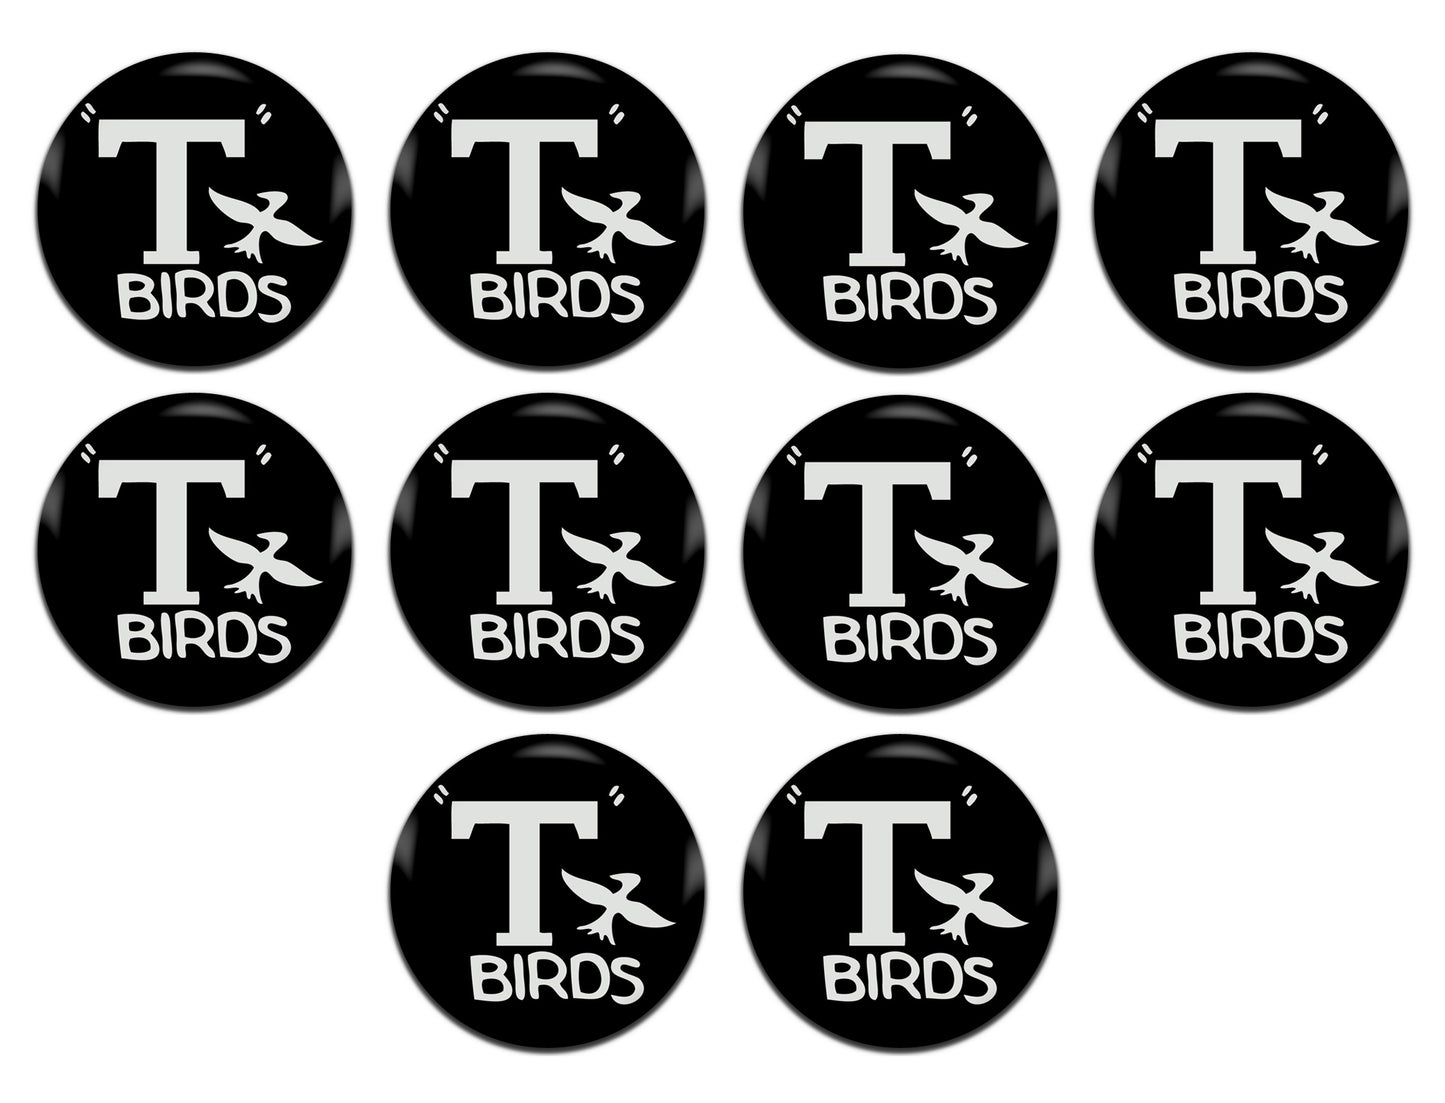 Grease T-Birds Movie Musical Film 70's Stag Party 25mm / 1 Inch D-Pin Button Badges (10x Set)